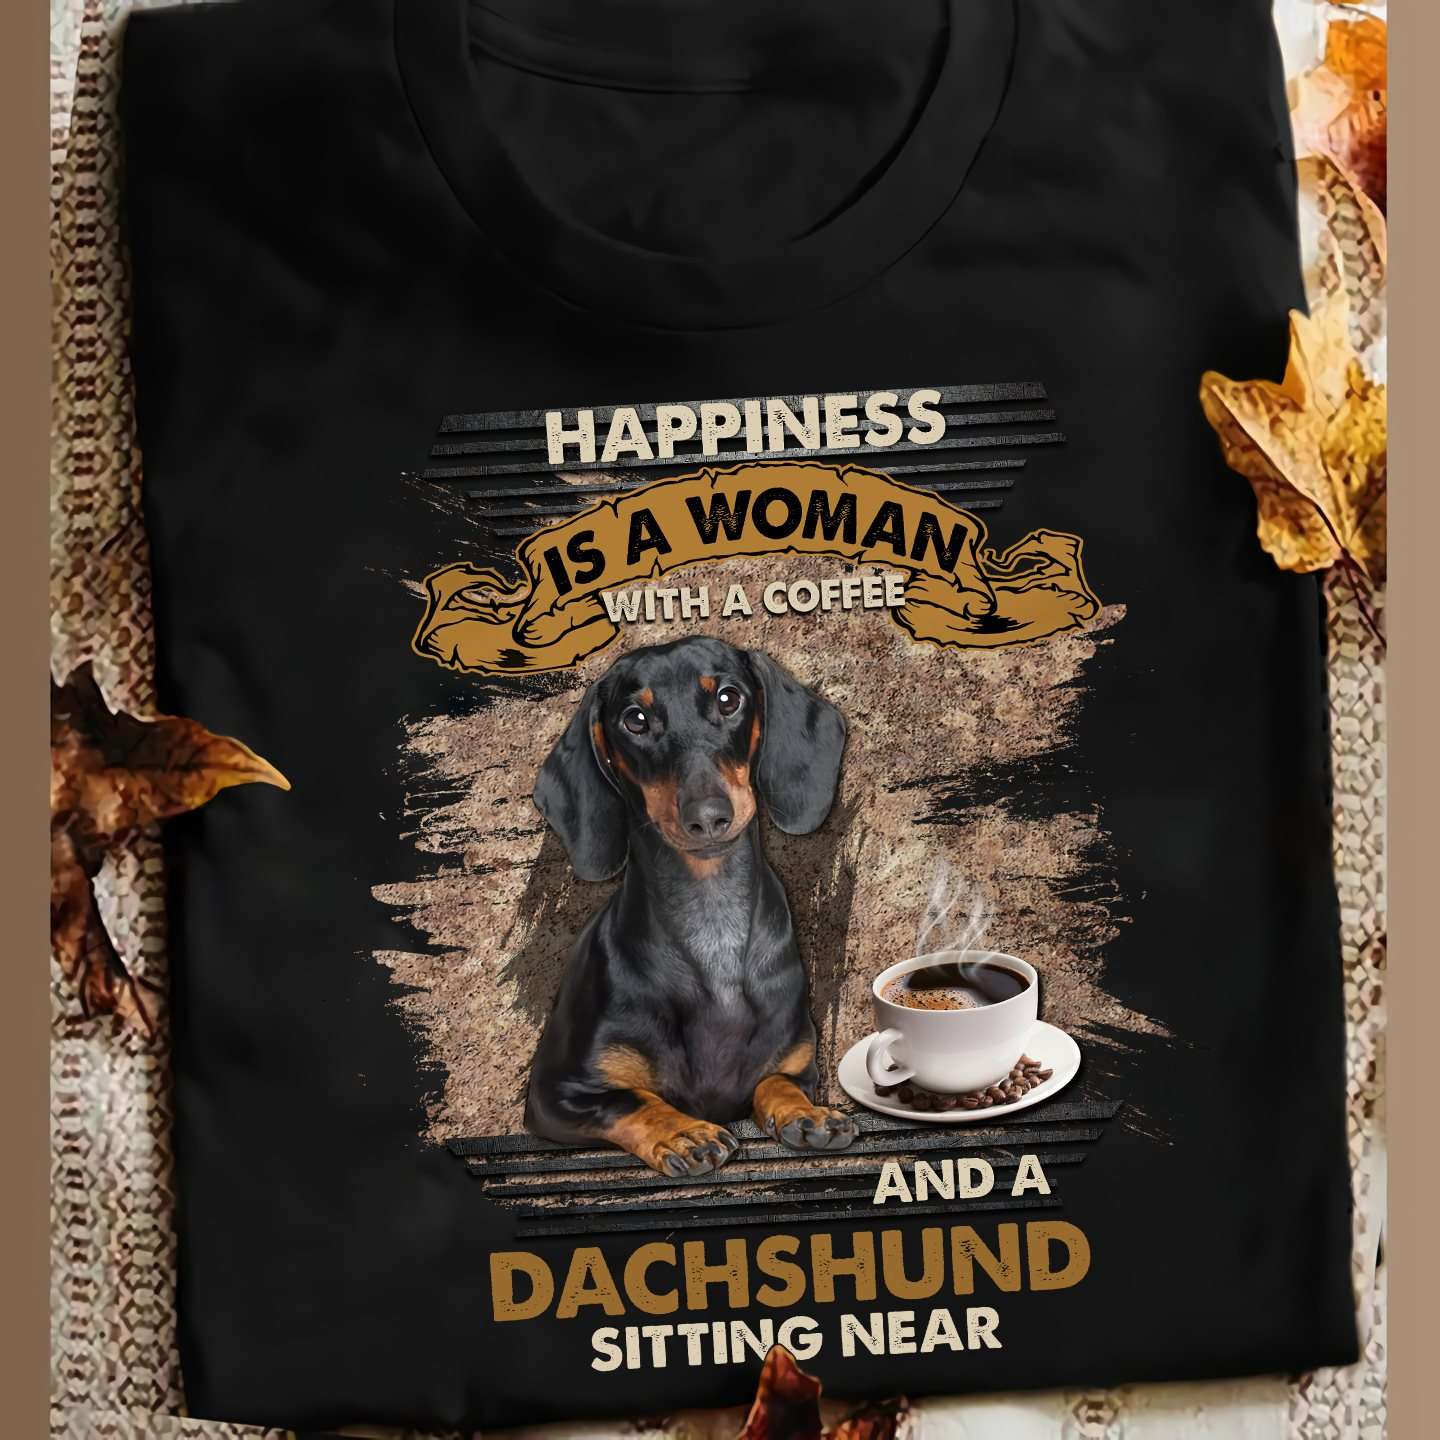 Dachshund Coffee - Happiness is a woman with a coffee and a dachshund sitting near